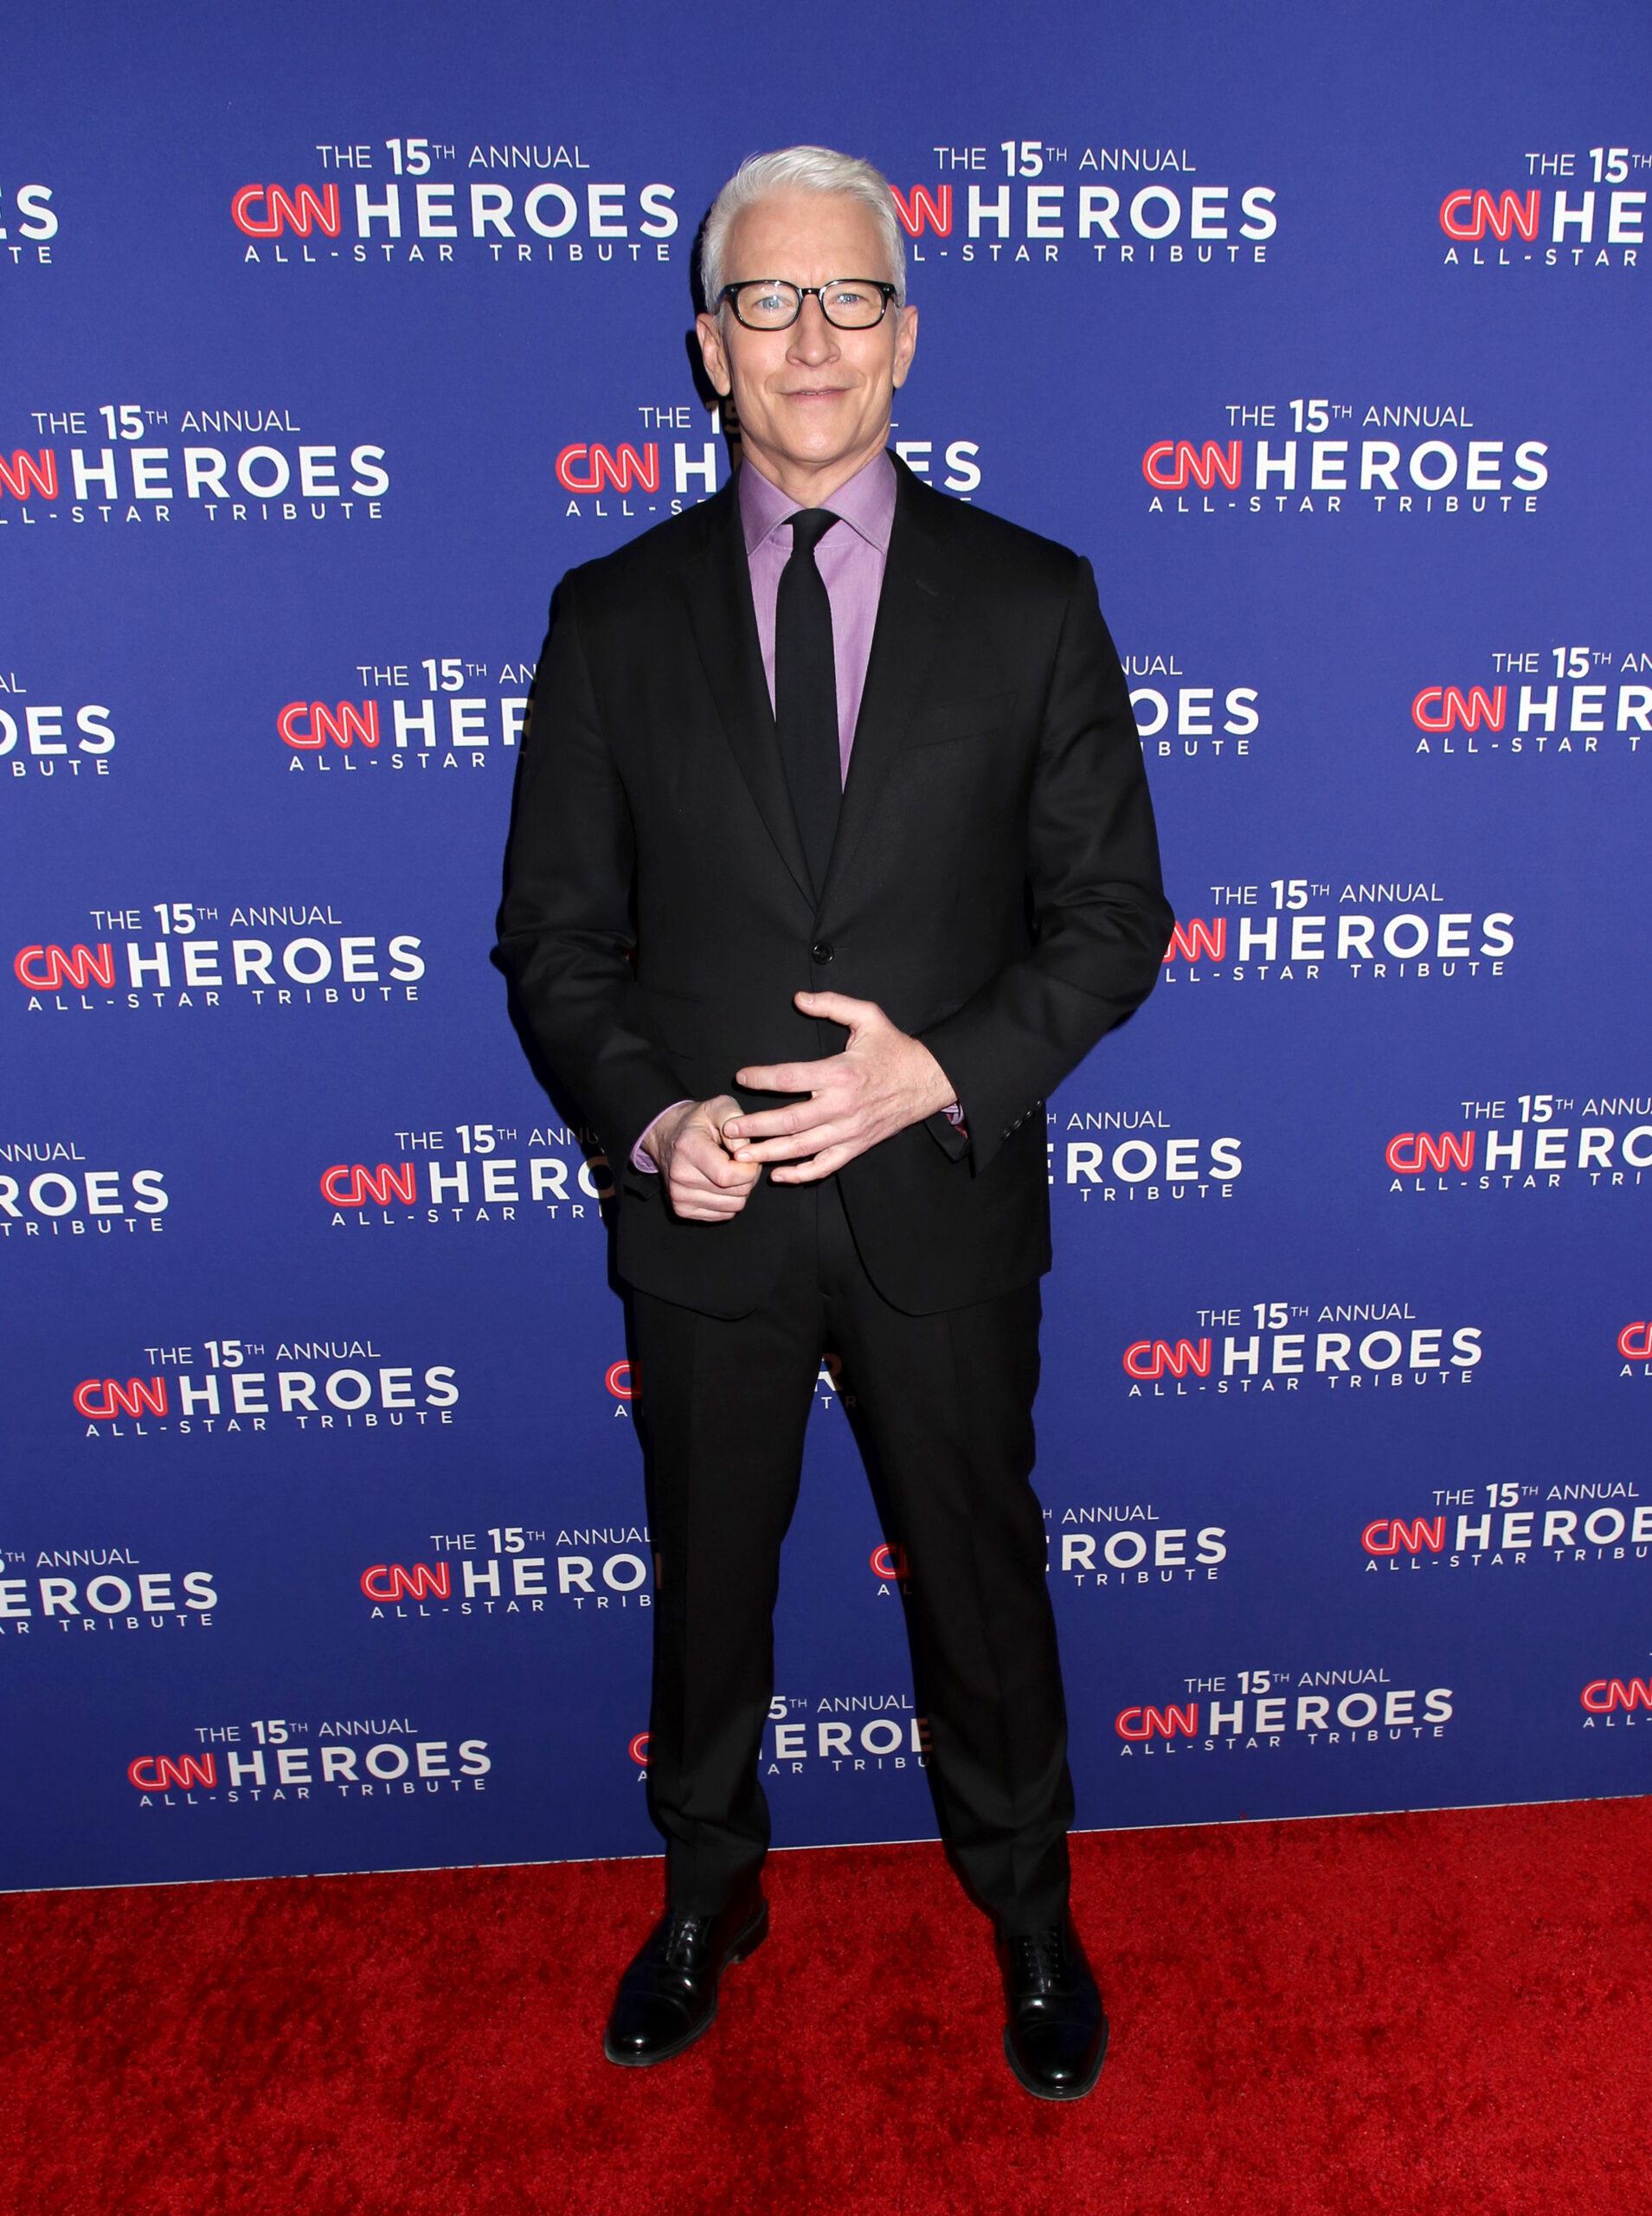 Anderson Cooper at the 15th Annual CNN Heroes All-Star Tribute